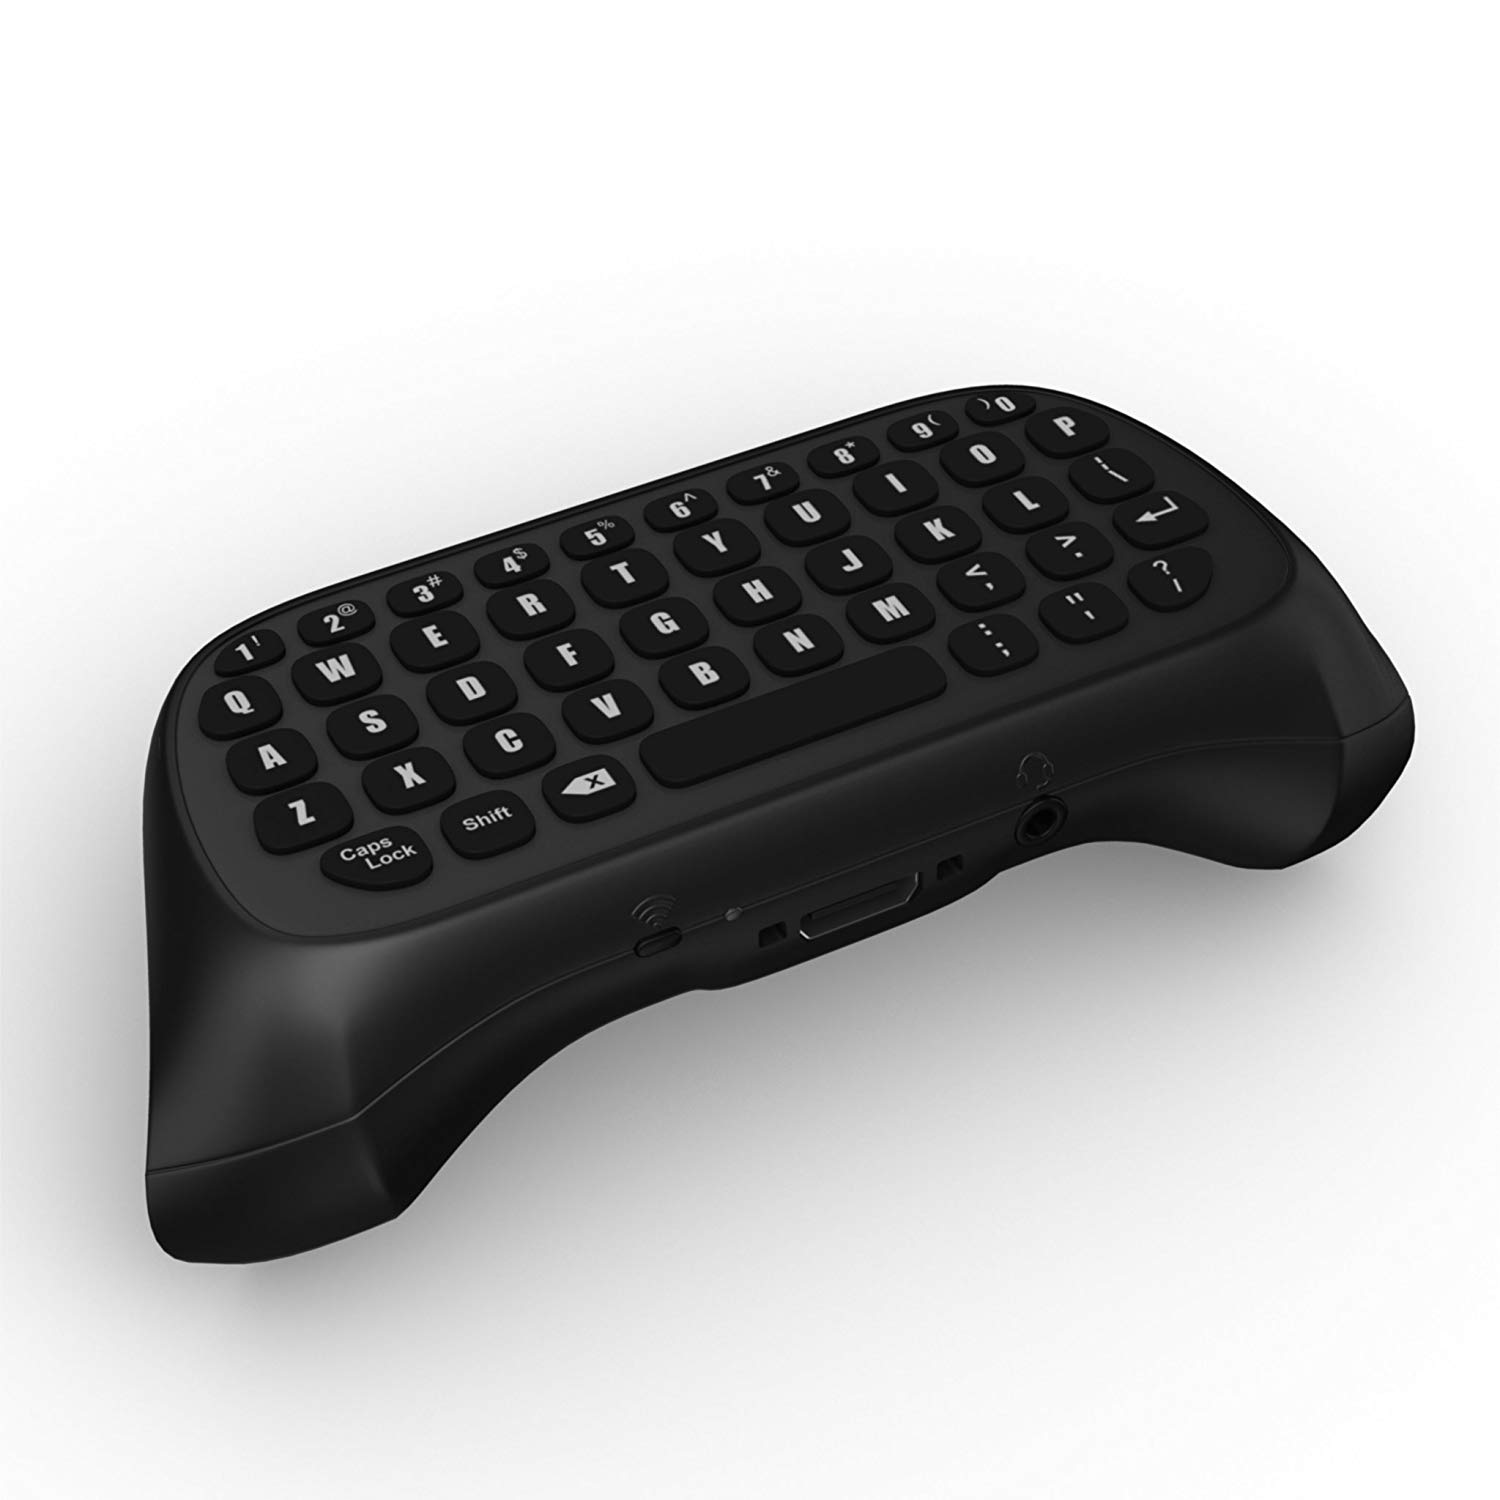 The Gamers Digital Chatpad